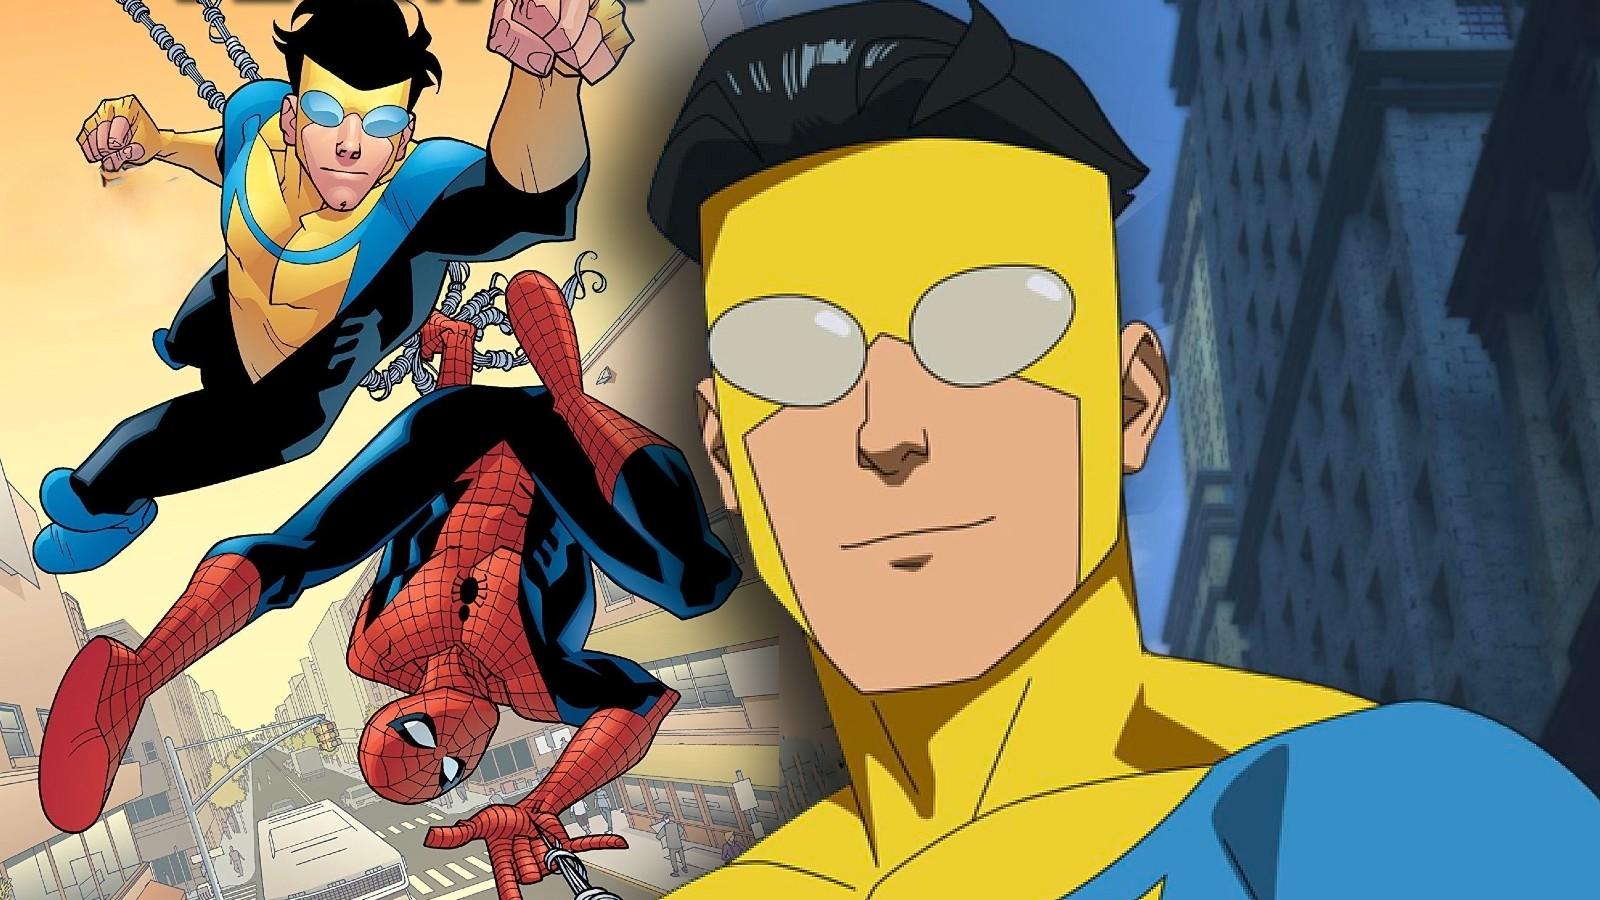 Spider-Man and Invincible's comic book cover and Invincible in the series